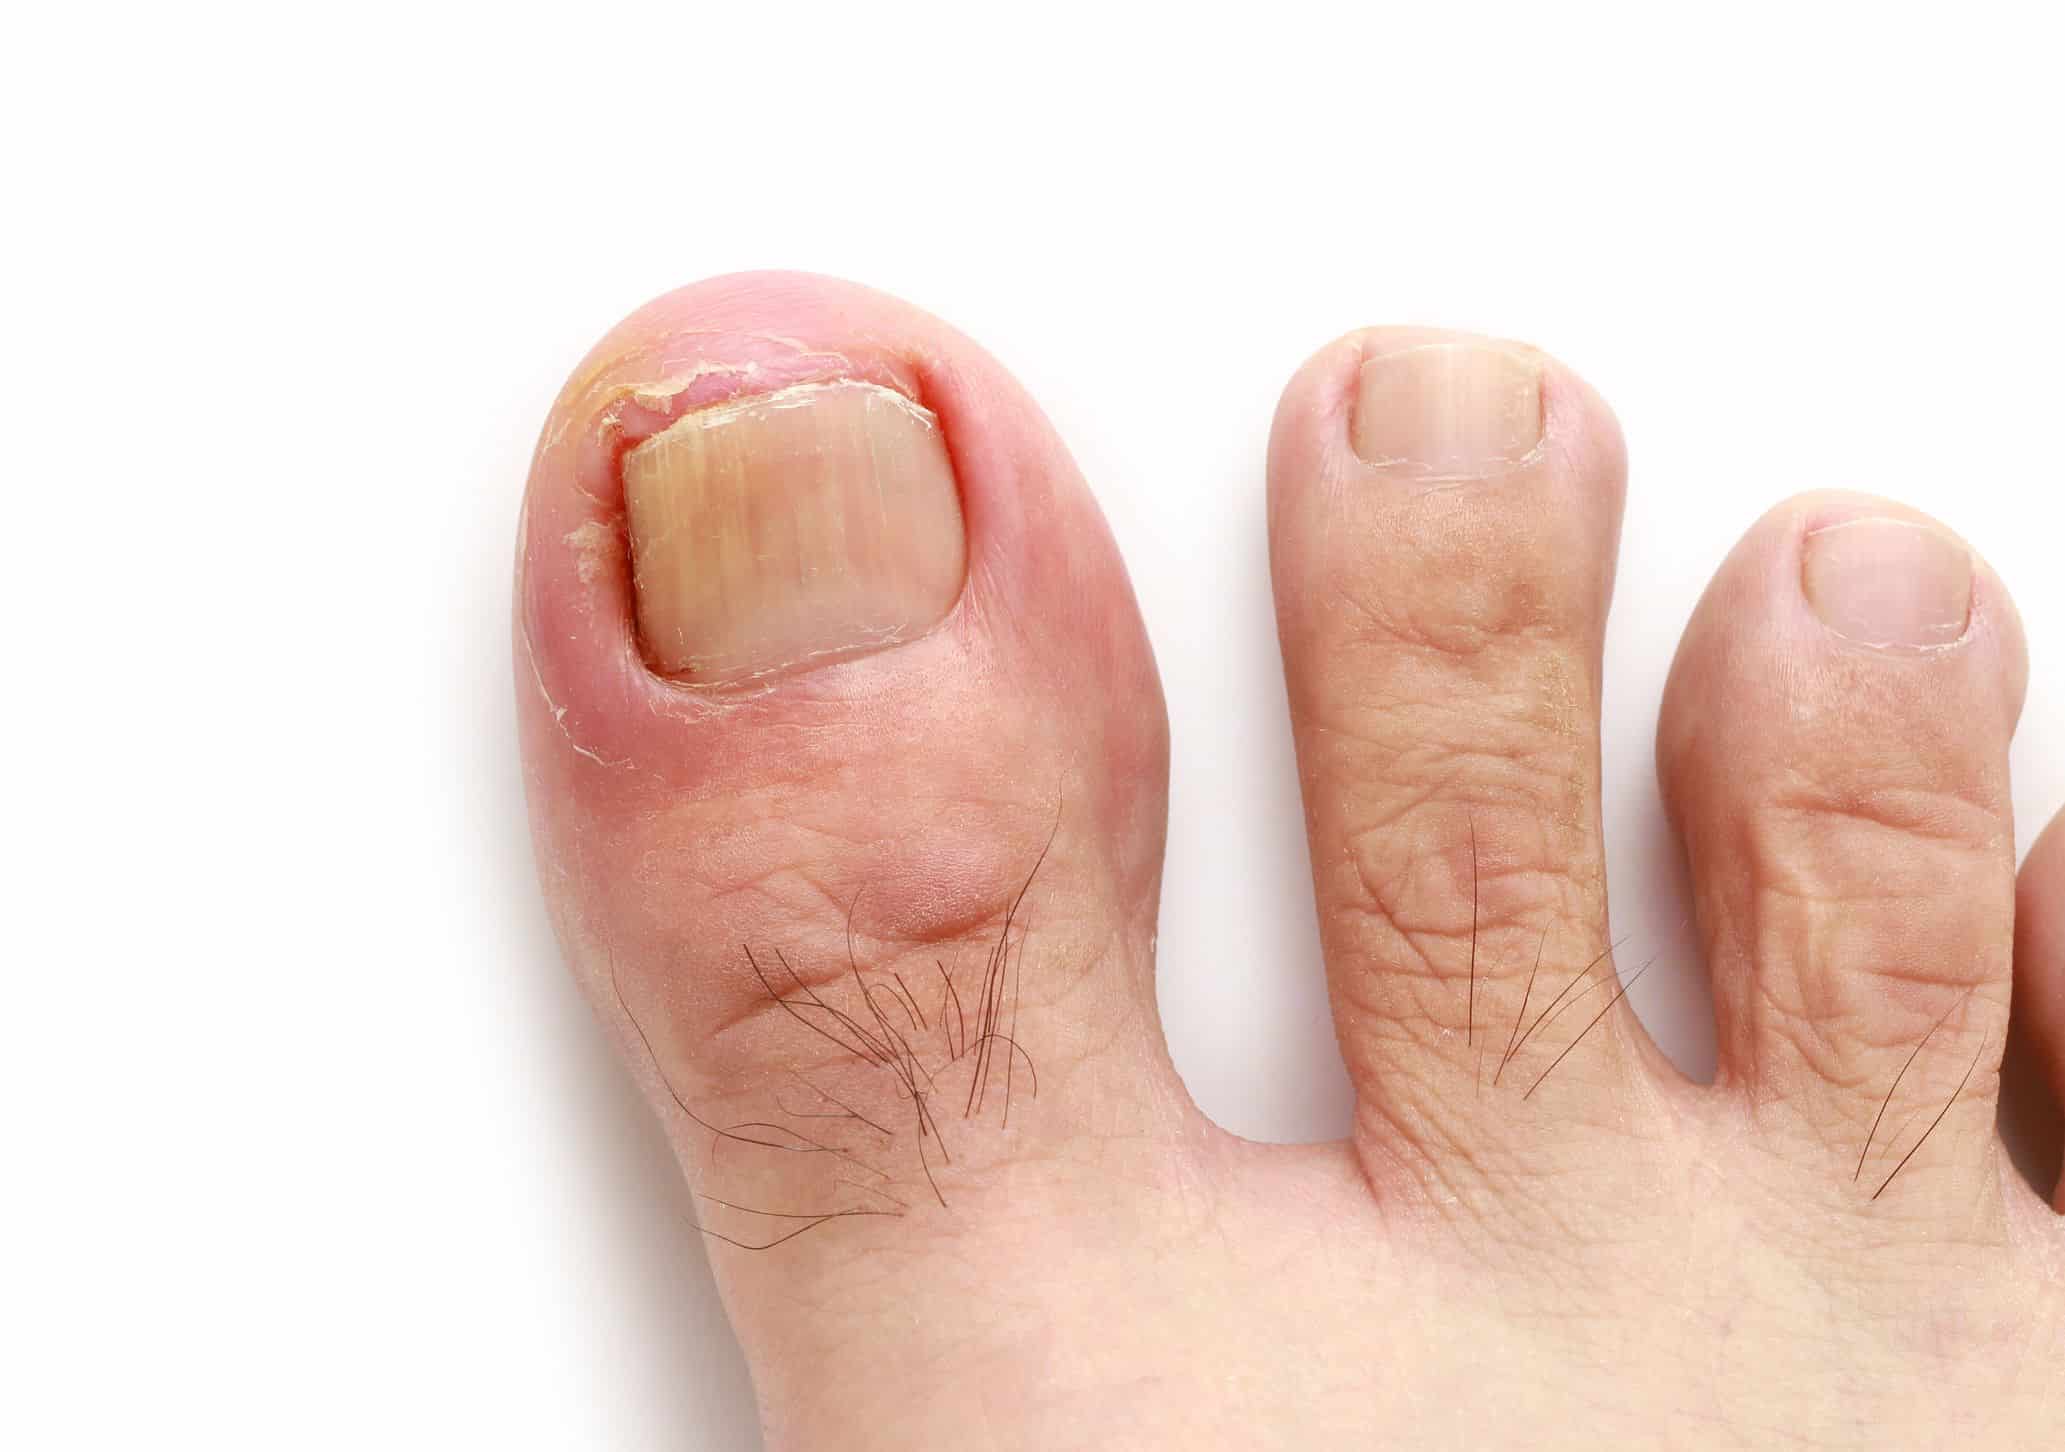 Medical Conditions That Can Affect Your Feet